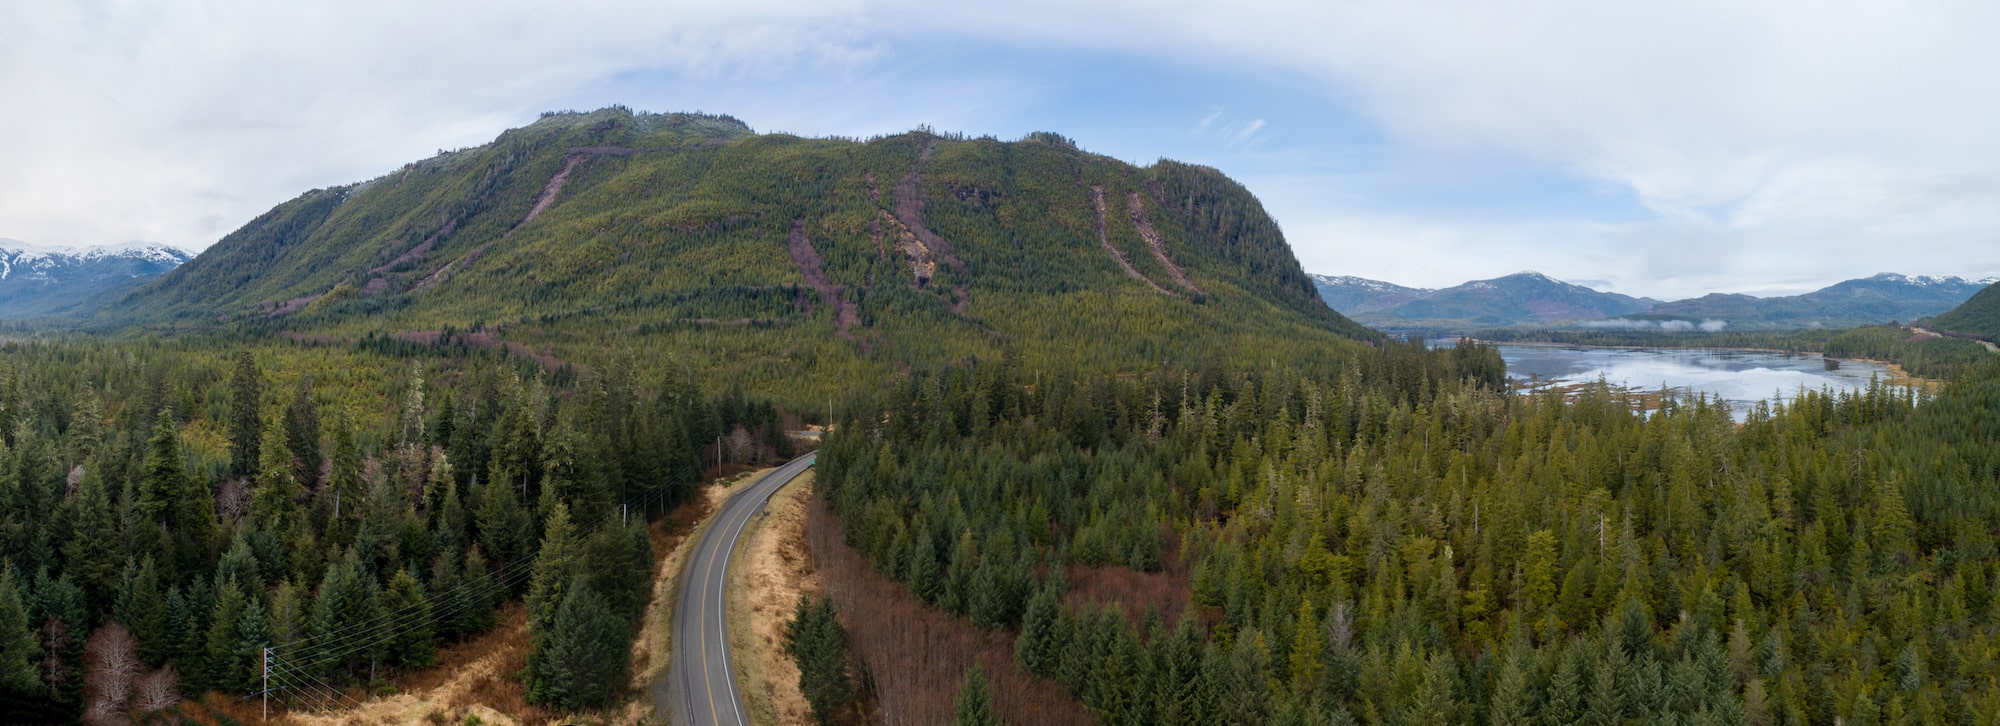 a panoramic view of a road curving into a forested area with large mountain